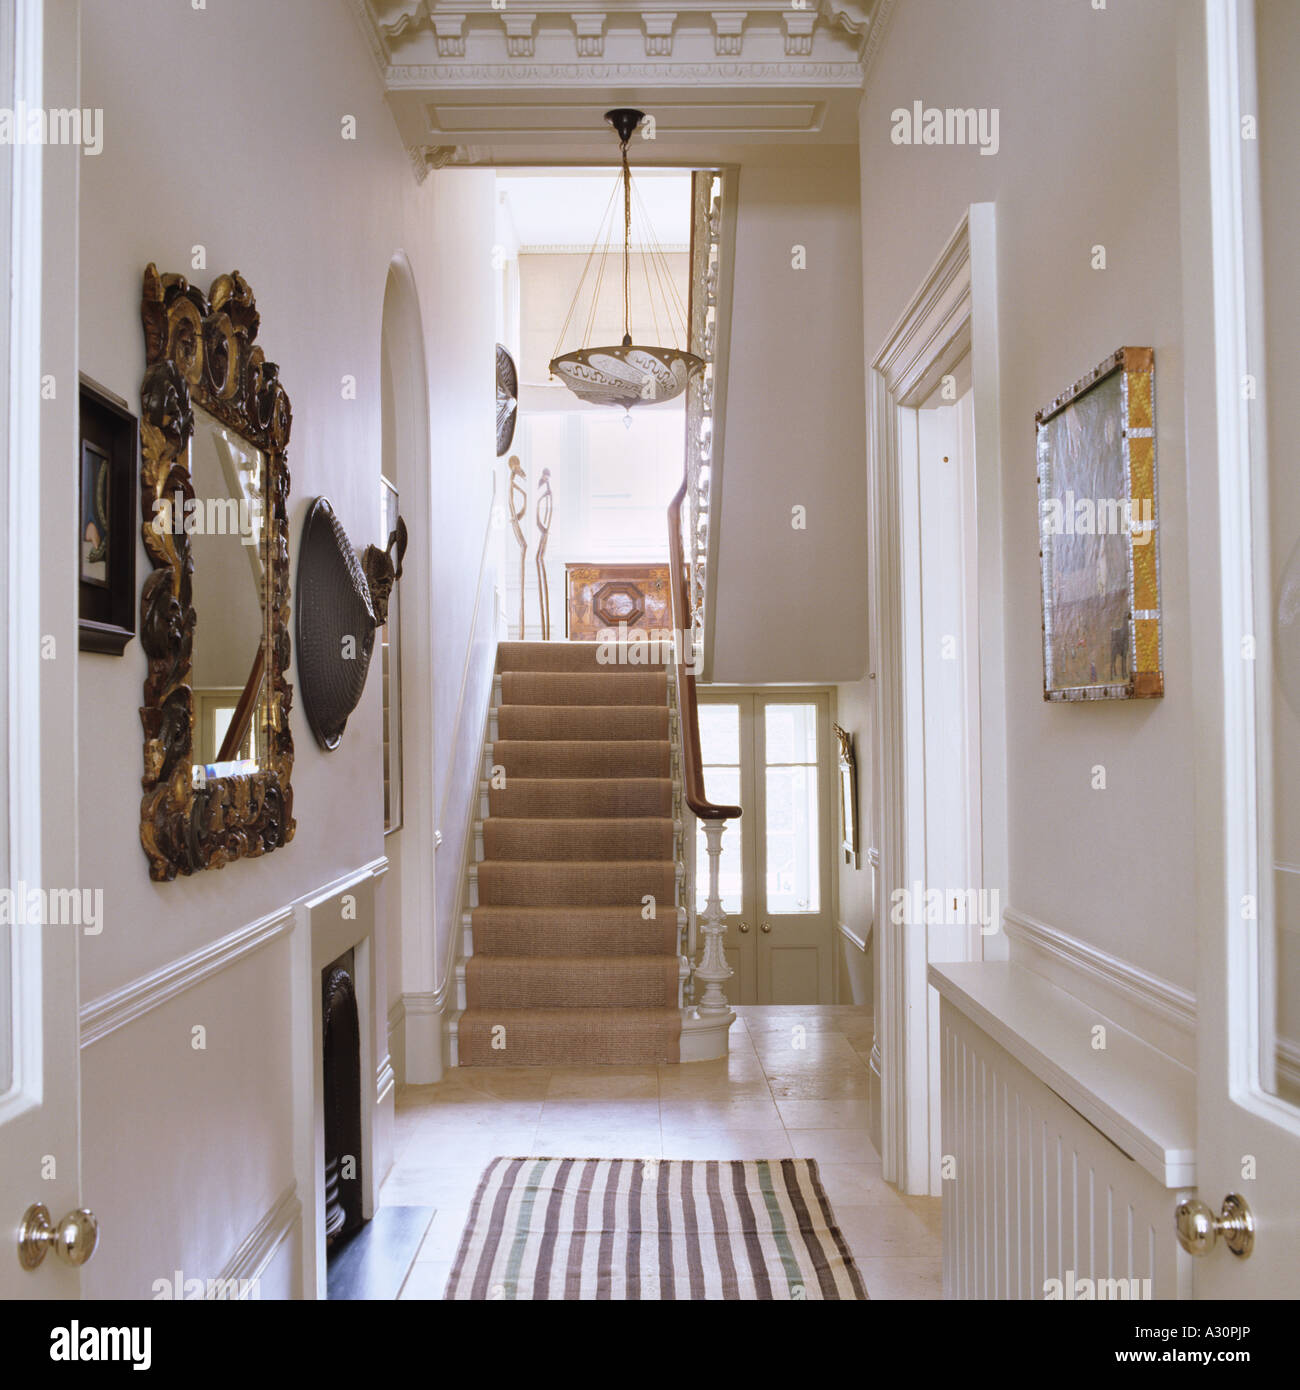 Artwork and staircase in hallway with striped rug Stock Photo